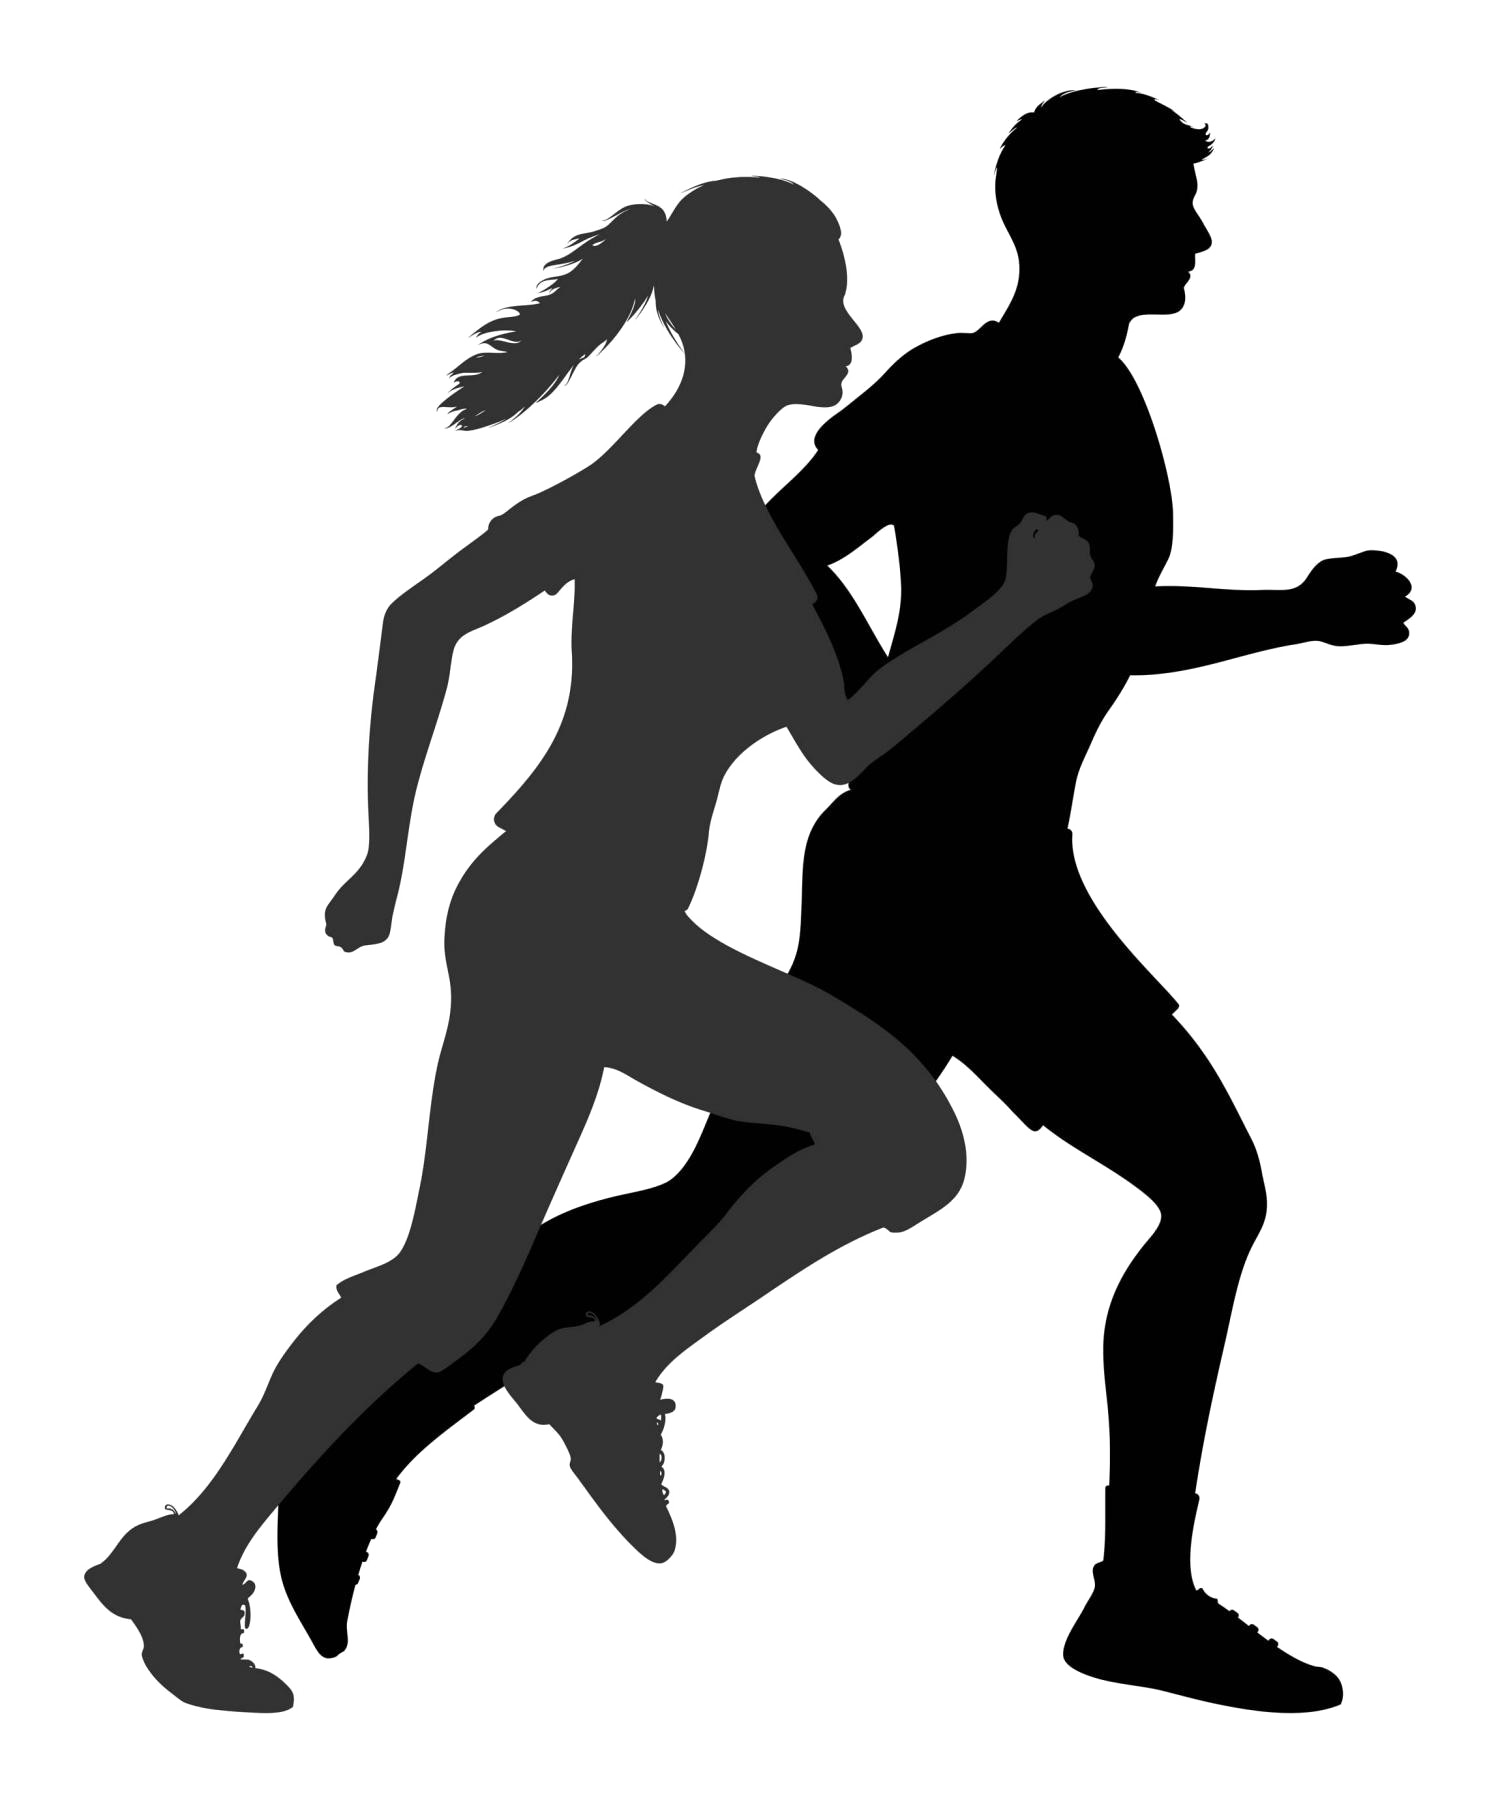 https://freepngimg.com/thumb/exercise/143238-vector-pic-exercise-free-clipart-hq.png